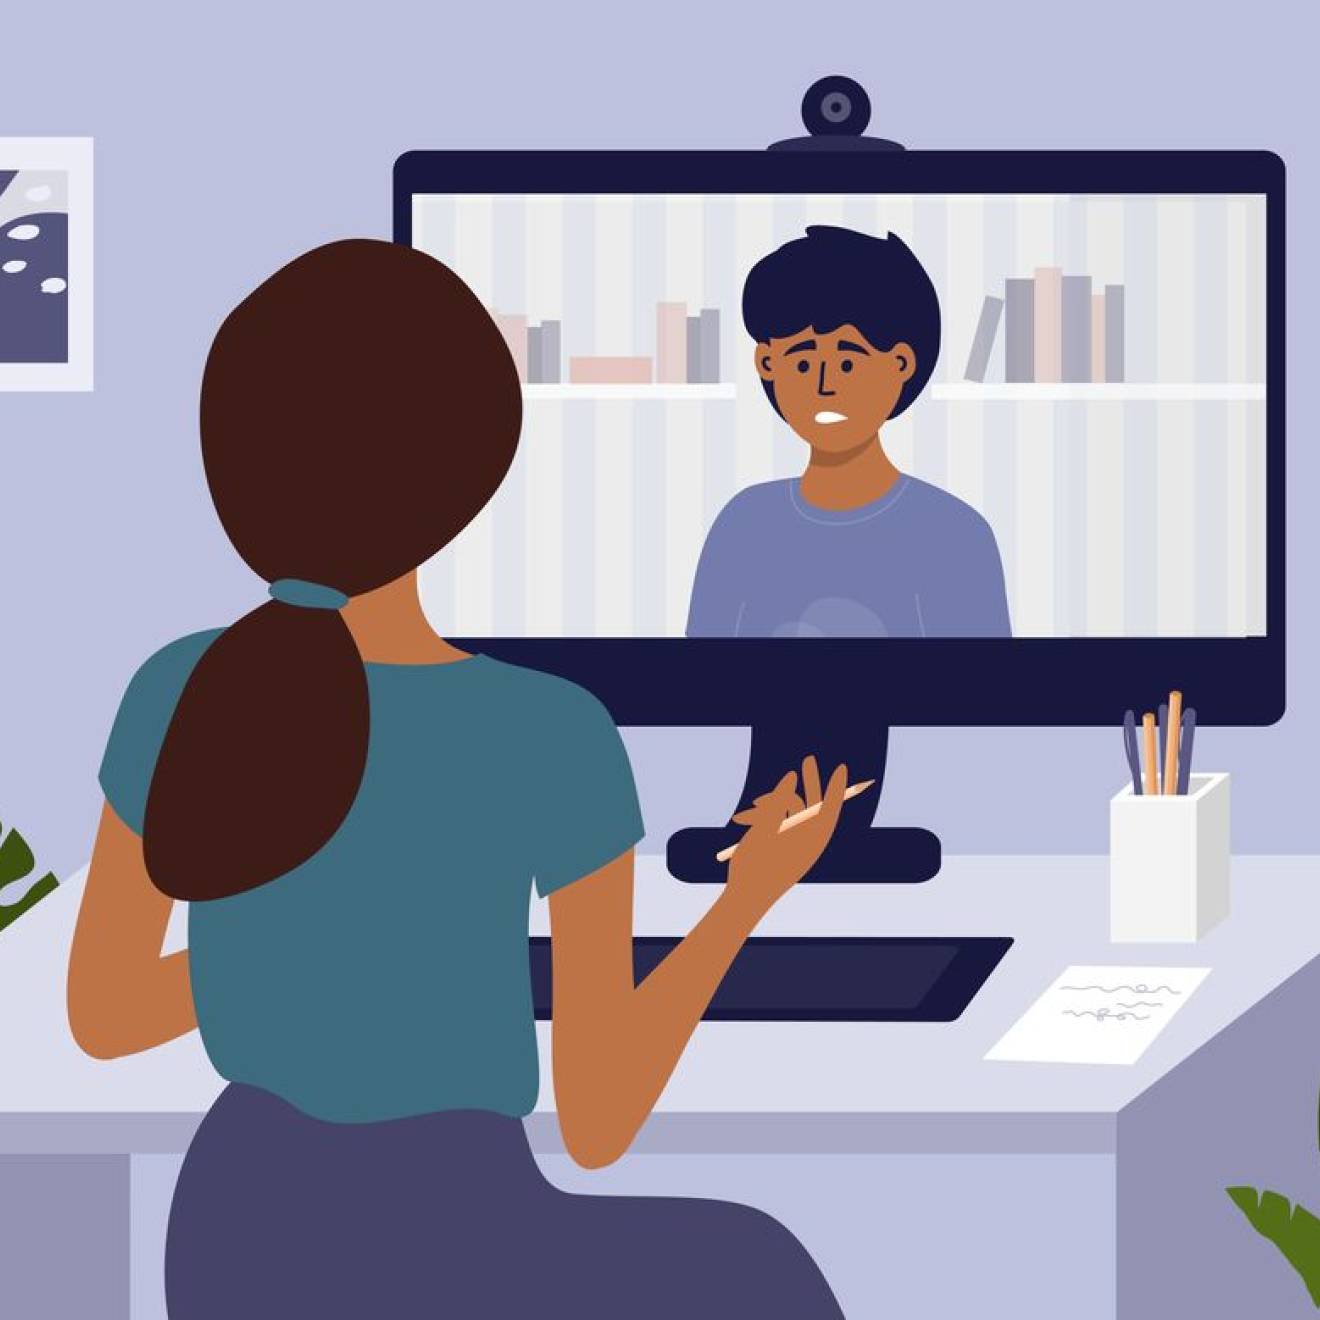 Illustration of a therapist talking with a patient via computer video conferencing.